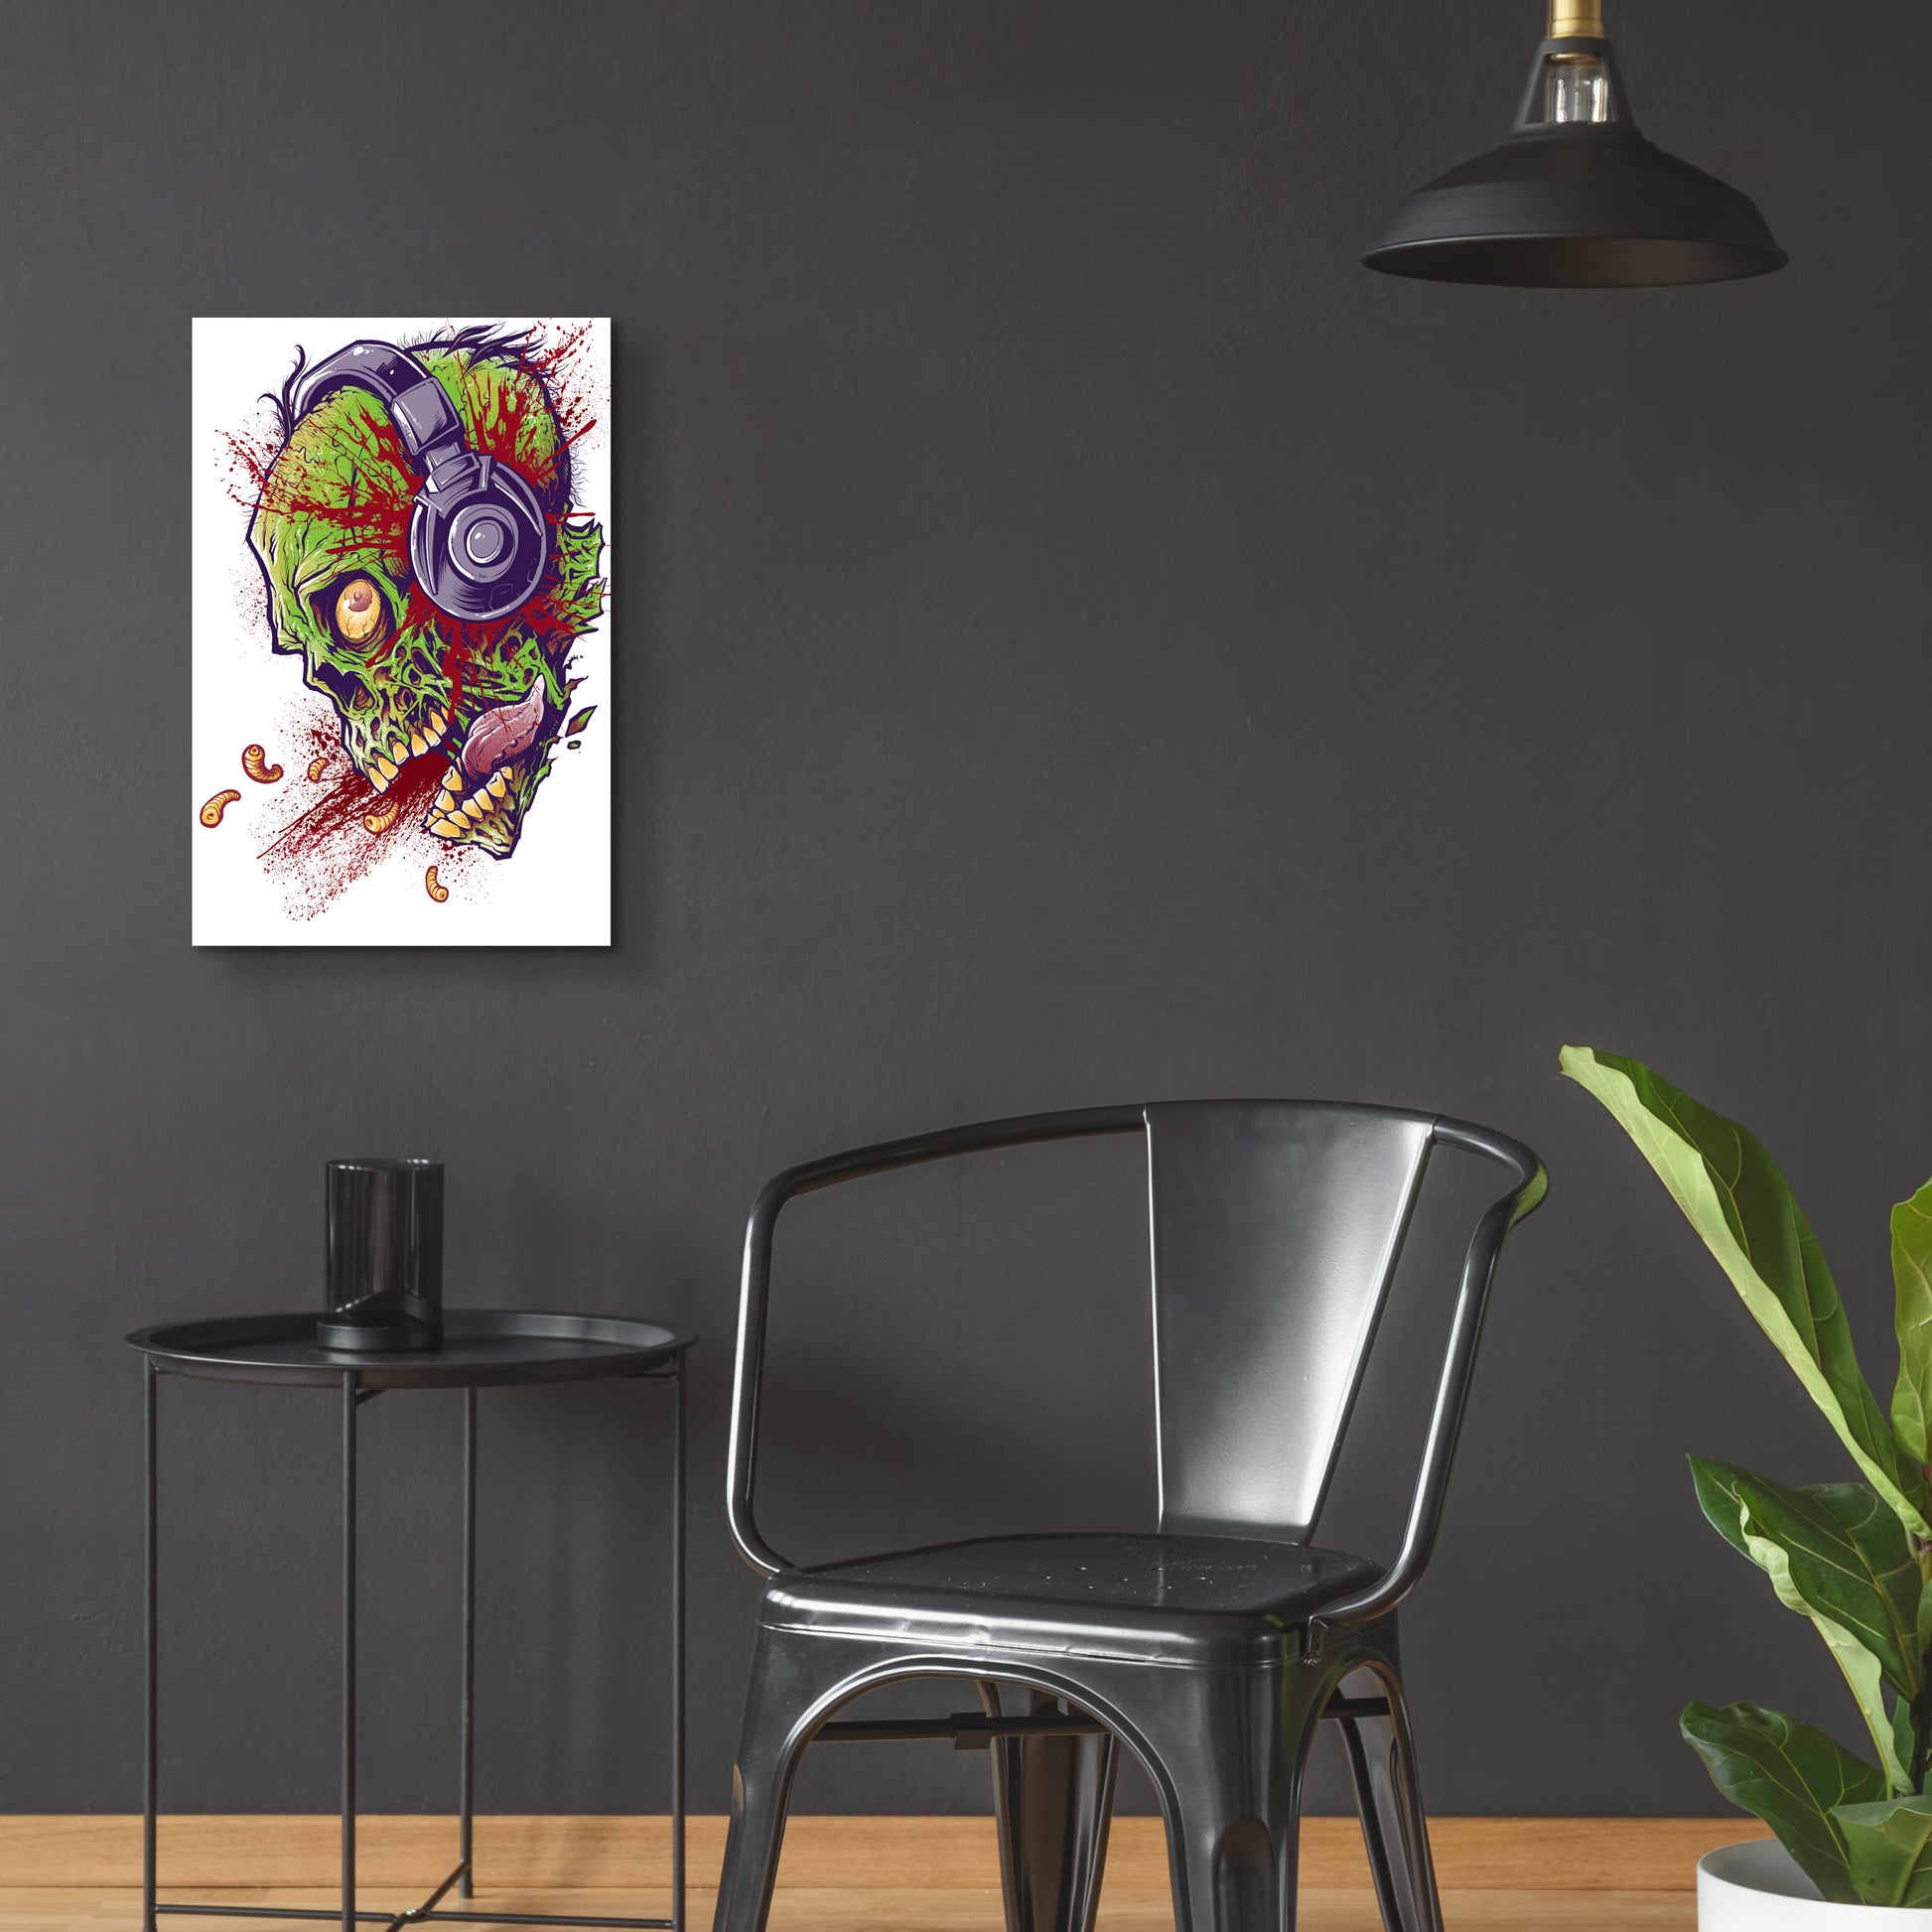 Epic Art 'Zombie With Headphones' by Flyland Designs, Acrylic Glass Wall Art,16x24